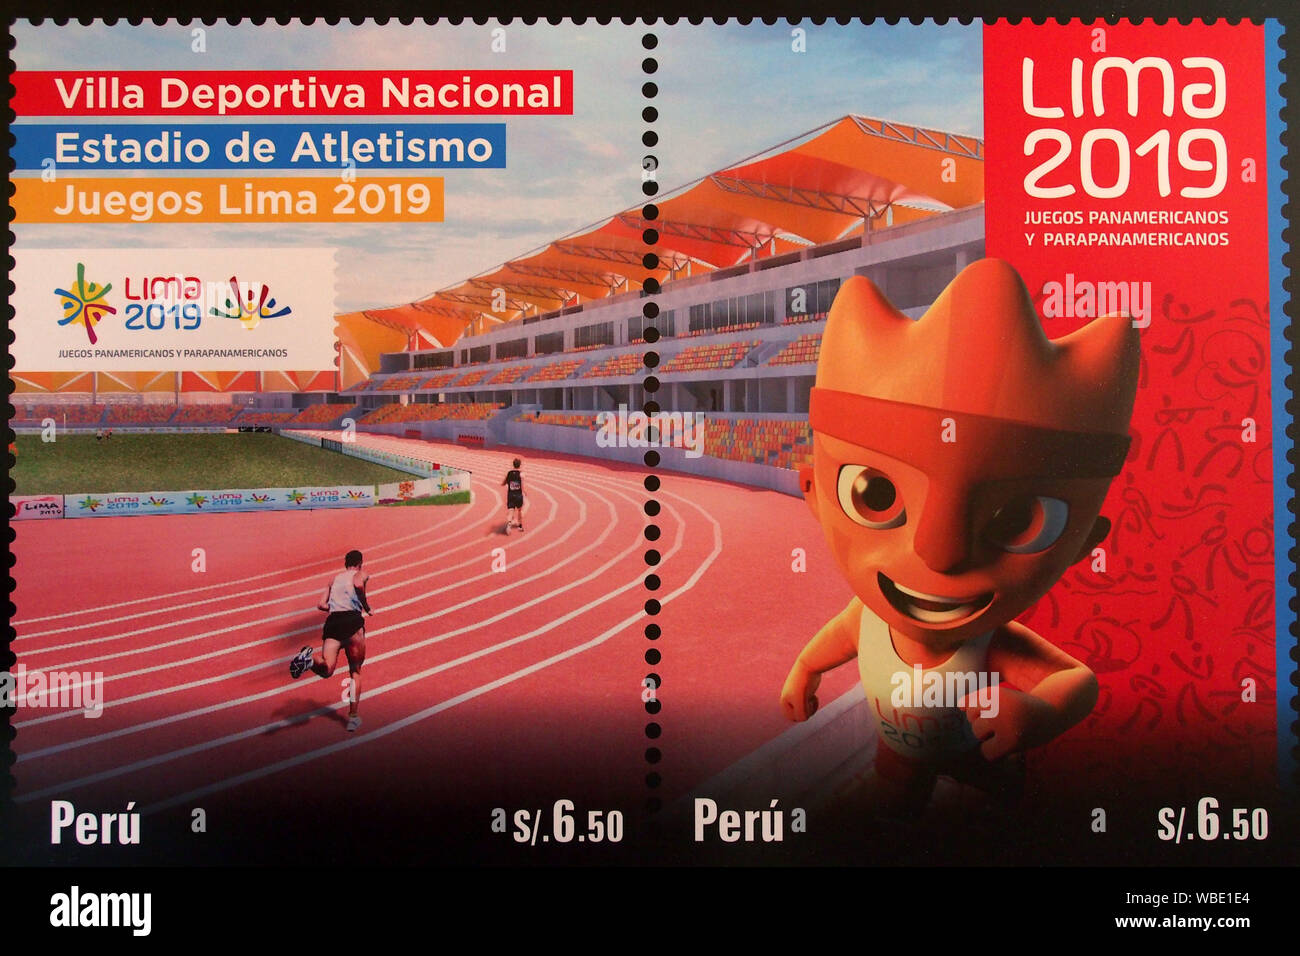 Lima 2019 and Serpost present the new stamp alluding to the Pan-American and Parapan American Games at the Central Post Office of Peru Stock Photo